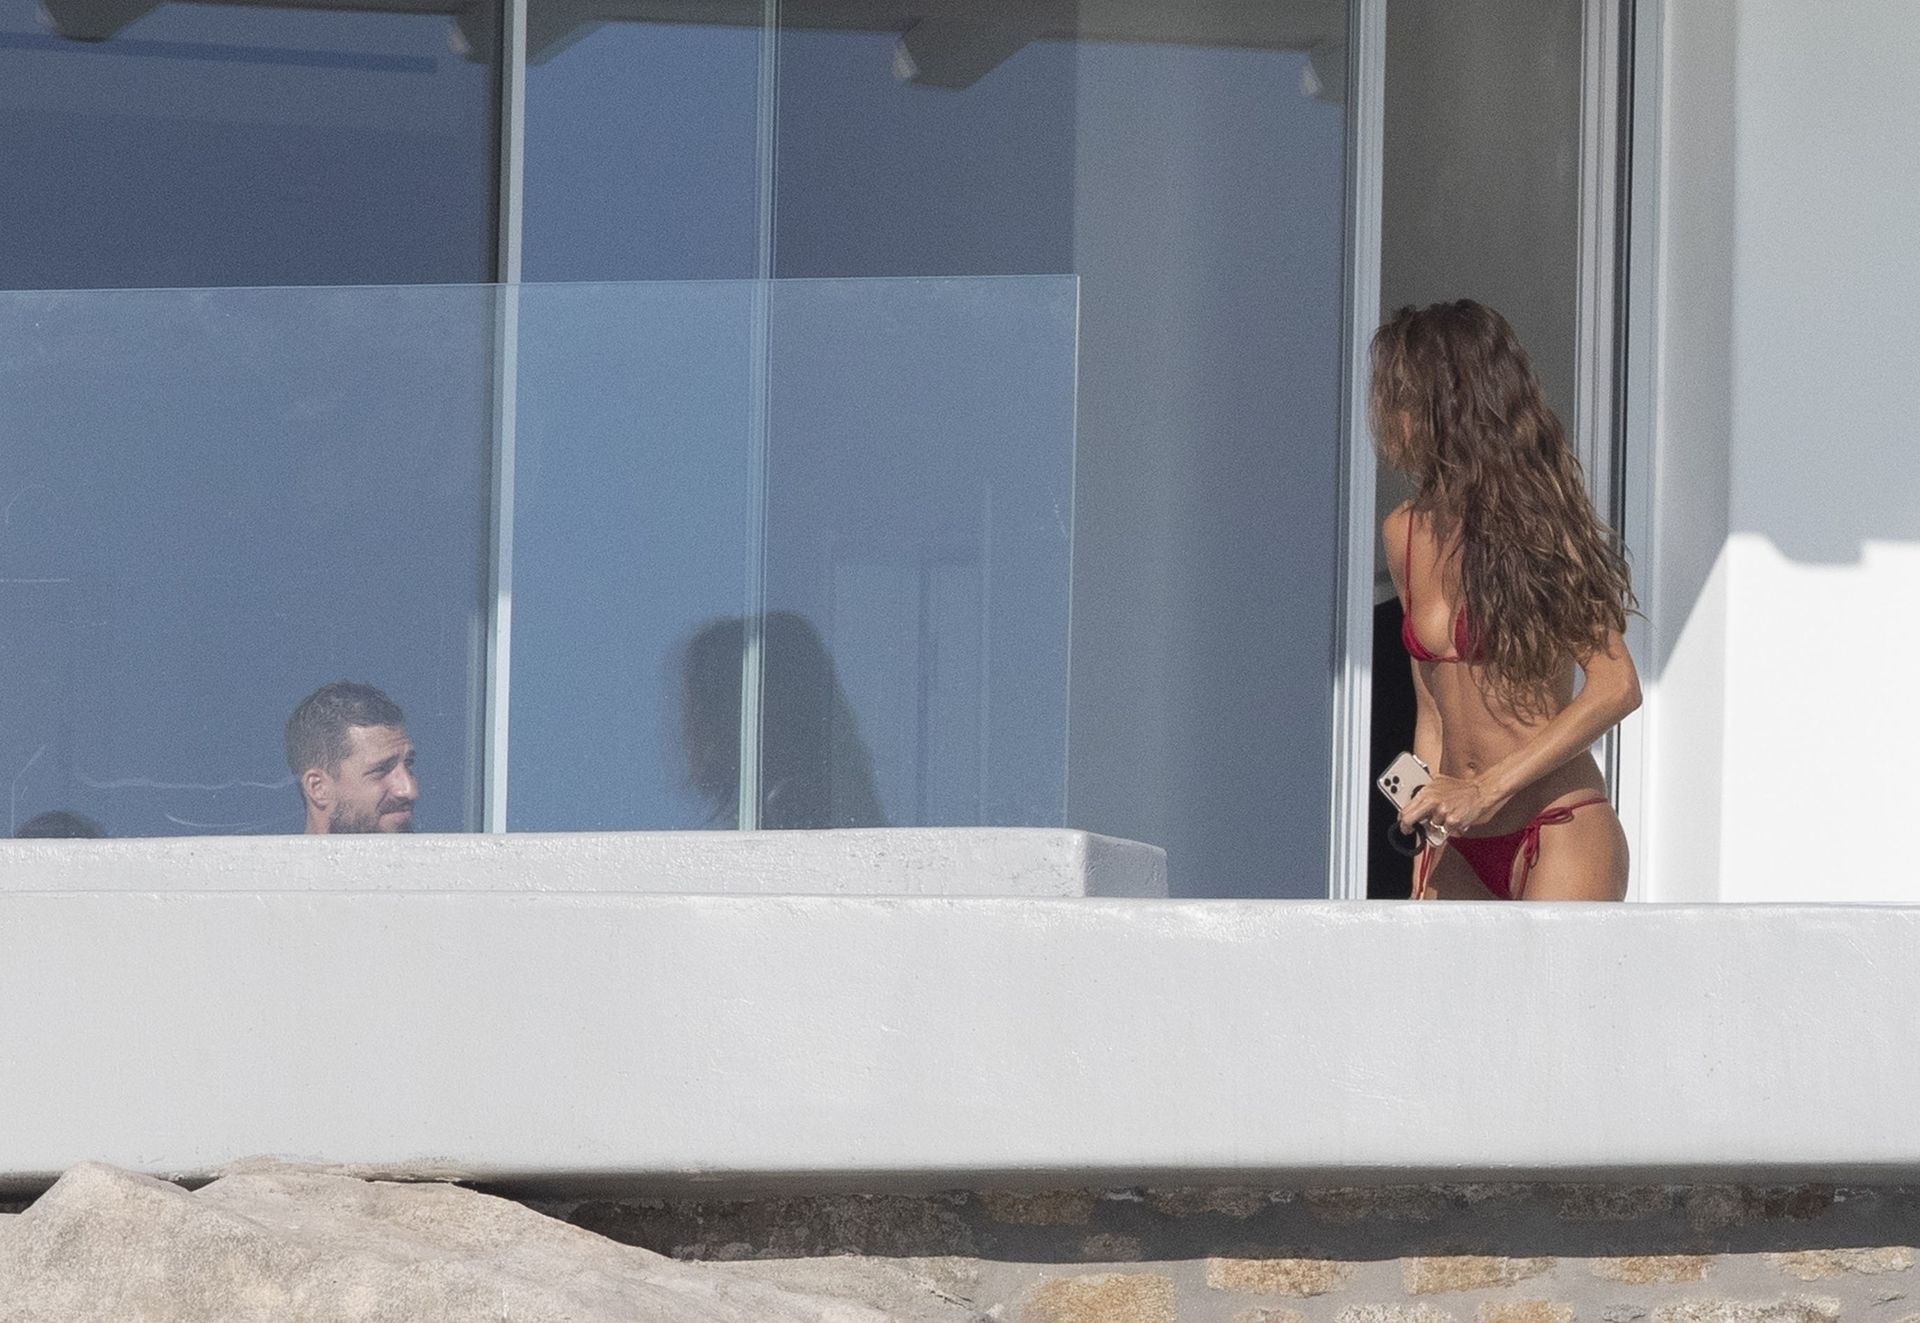 Izabel Goulart & Kevin Trapp are Seen on Holiday in Mykonos (36 Photos)